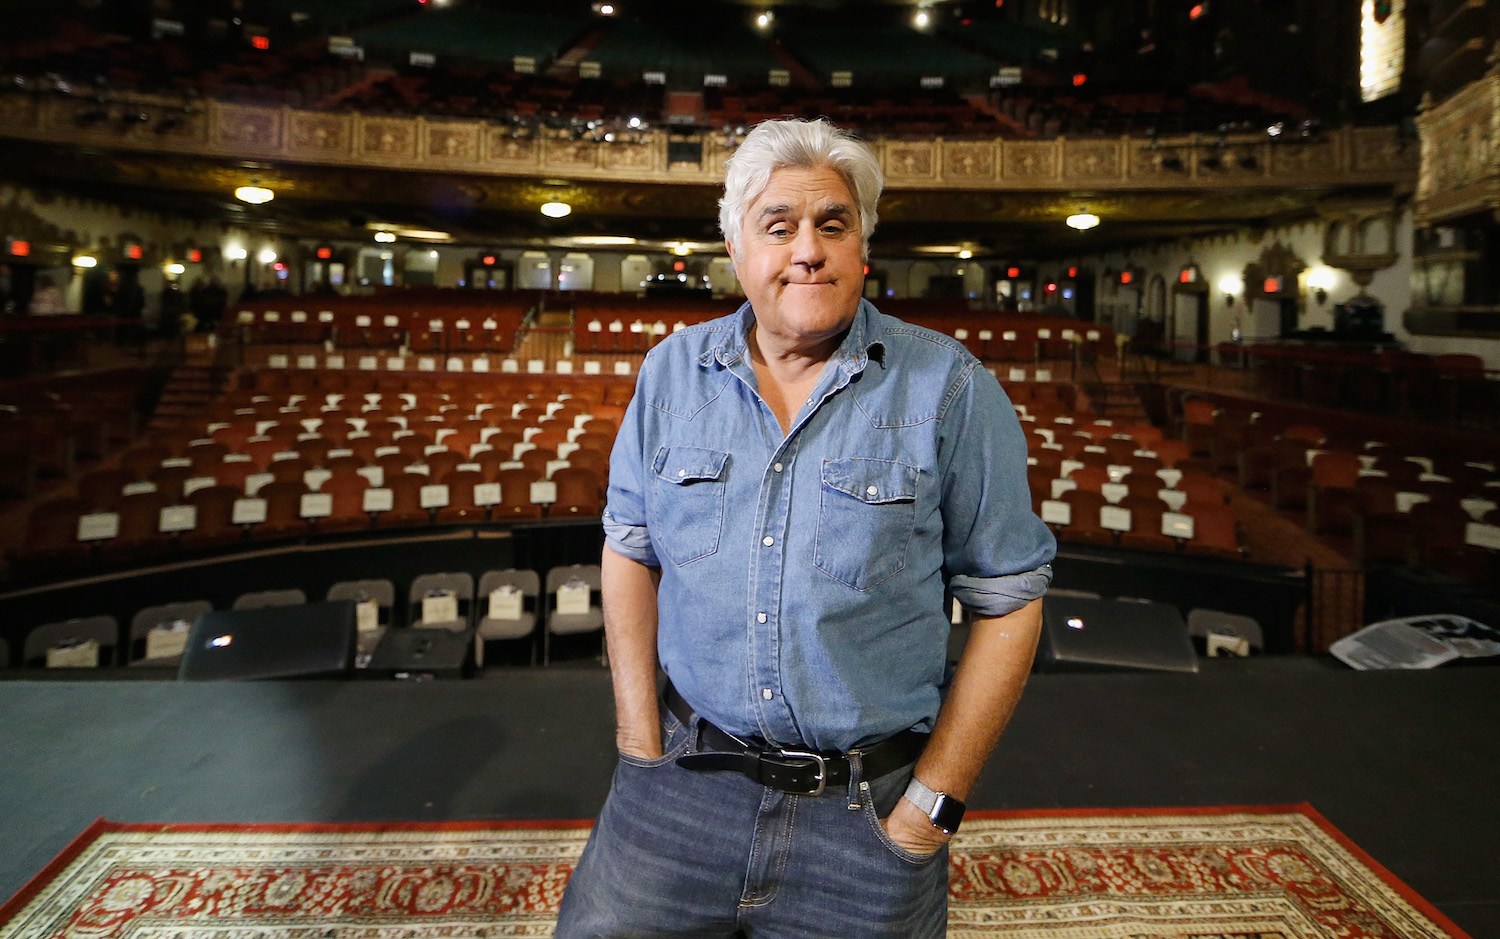 Jay Leno stands on a stage before a comedy show, the audience chairs visible behind him.